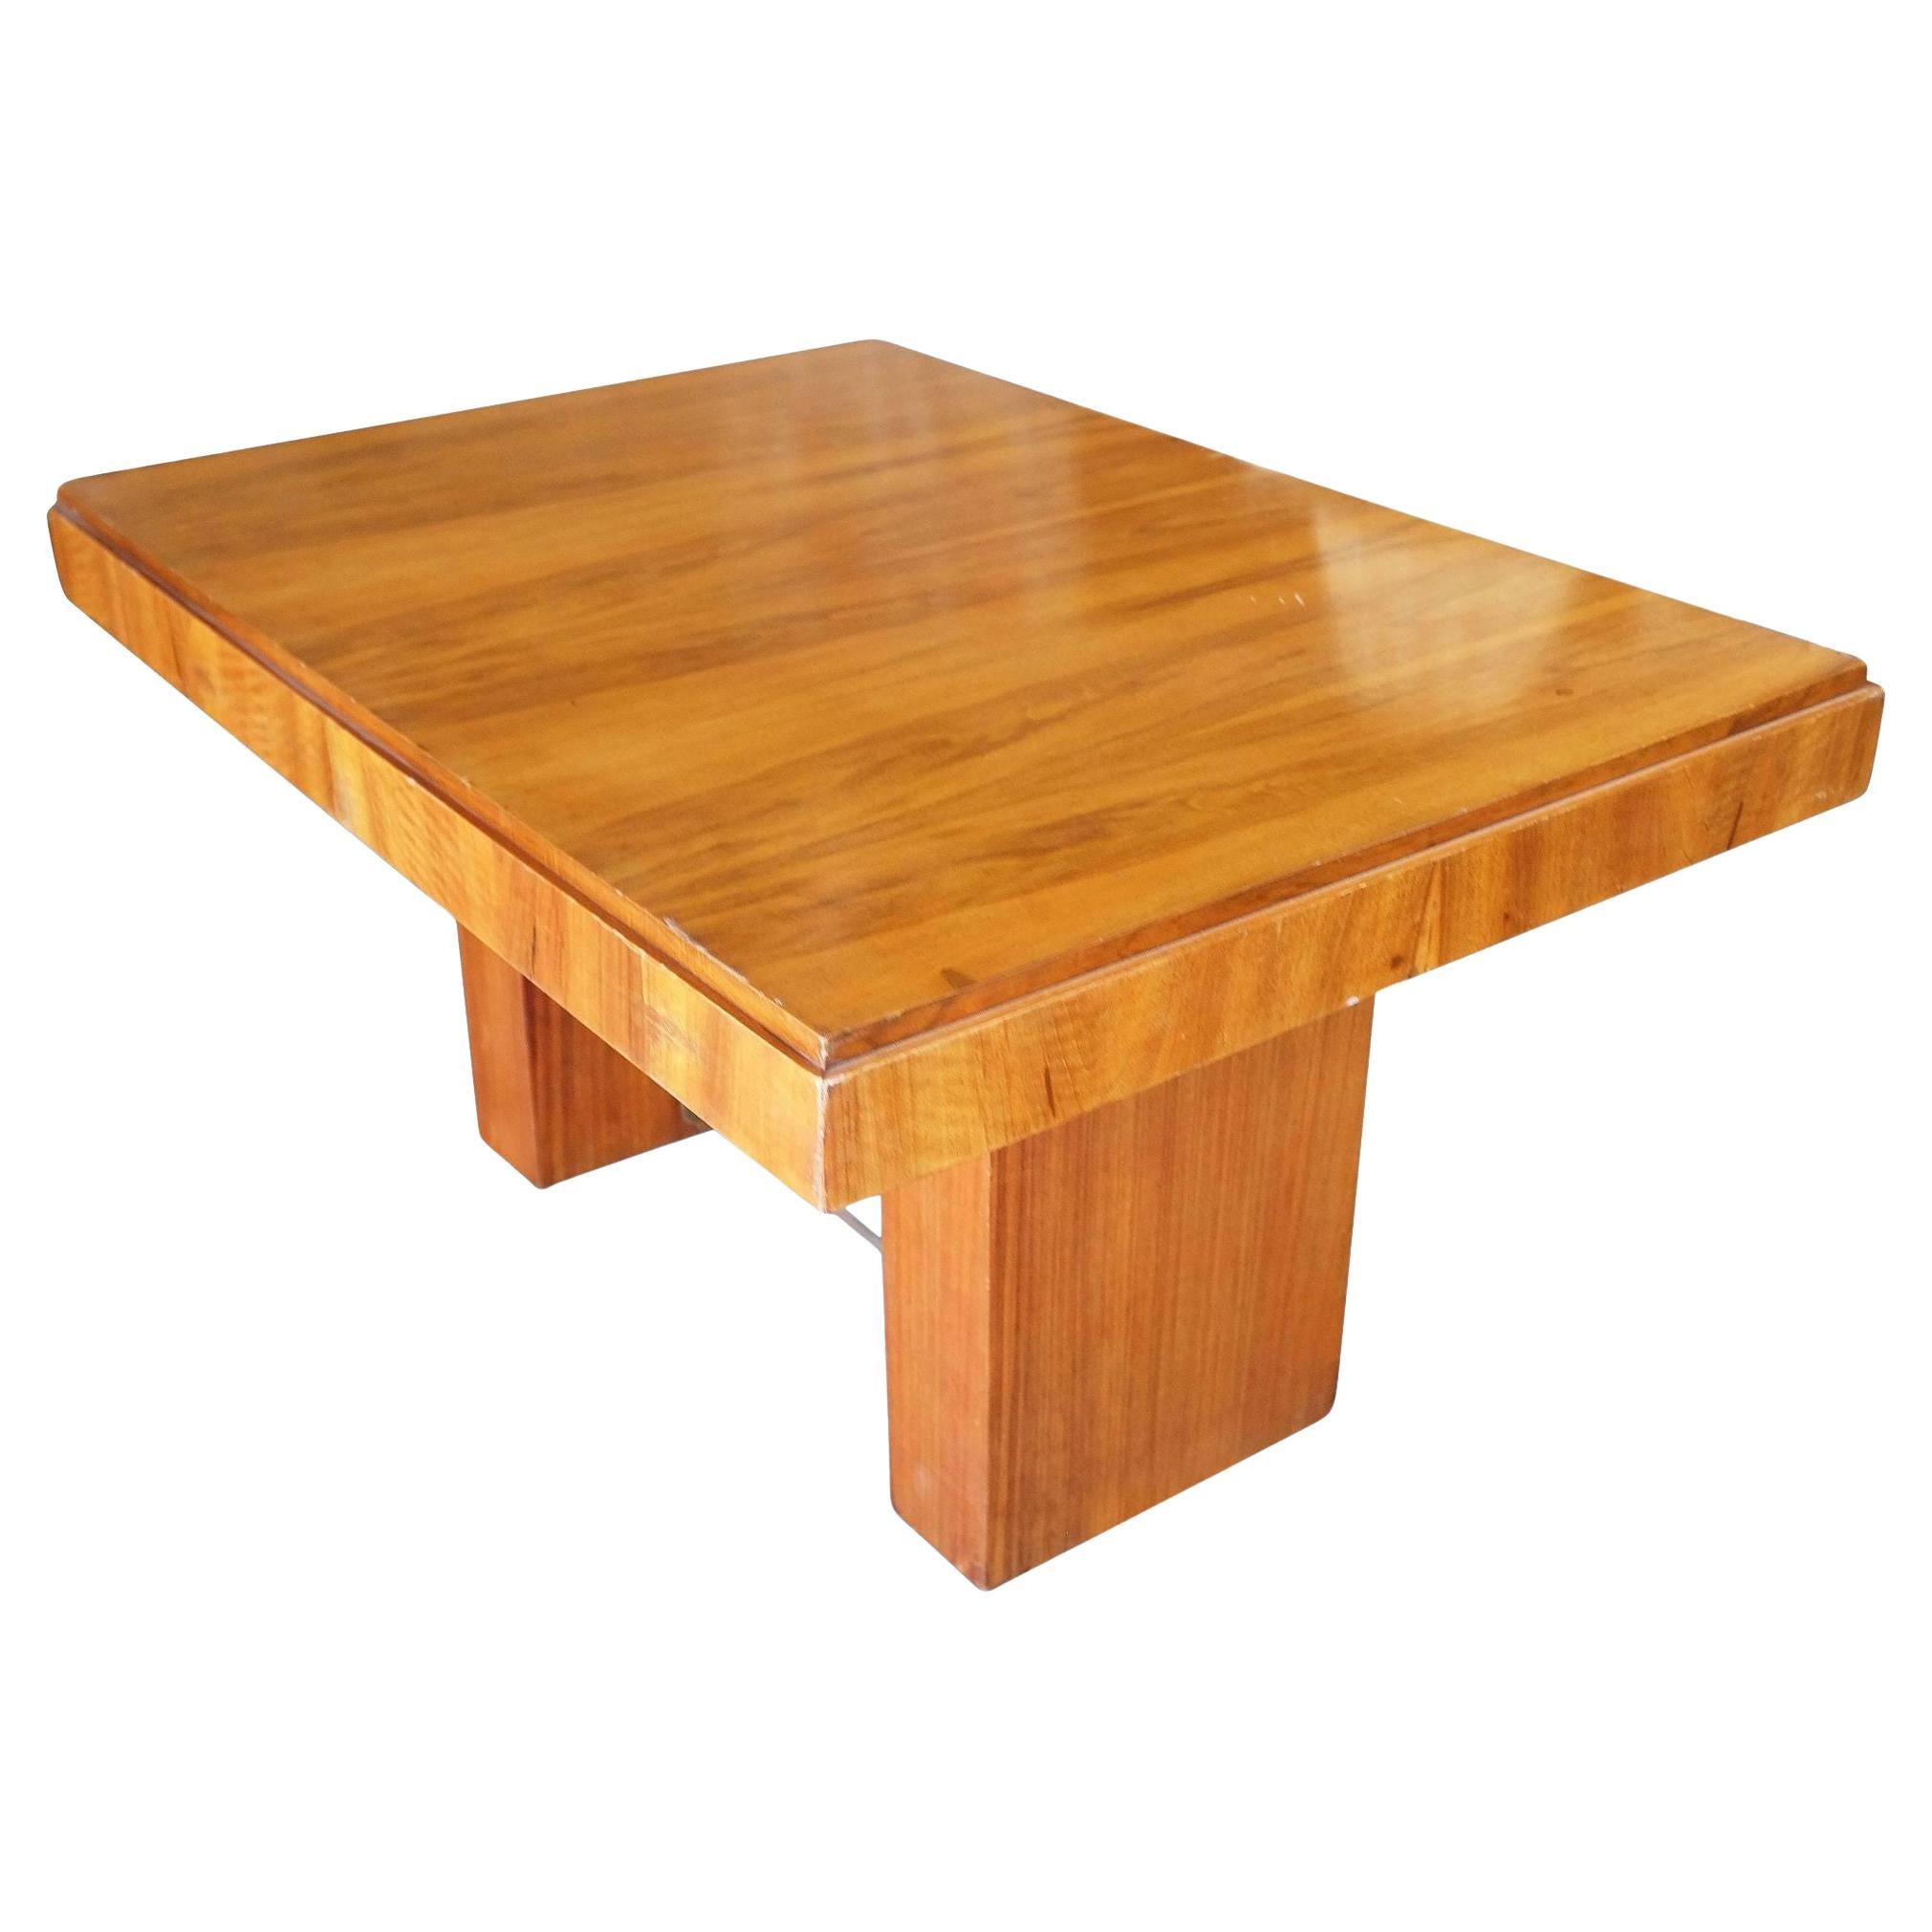 Charles Dudouyt Cubist Inspired Walnut Desk / Dining Table For Sale